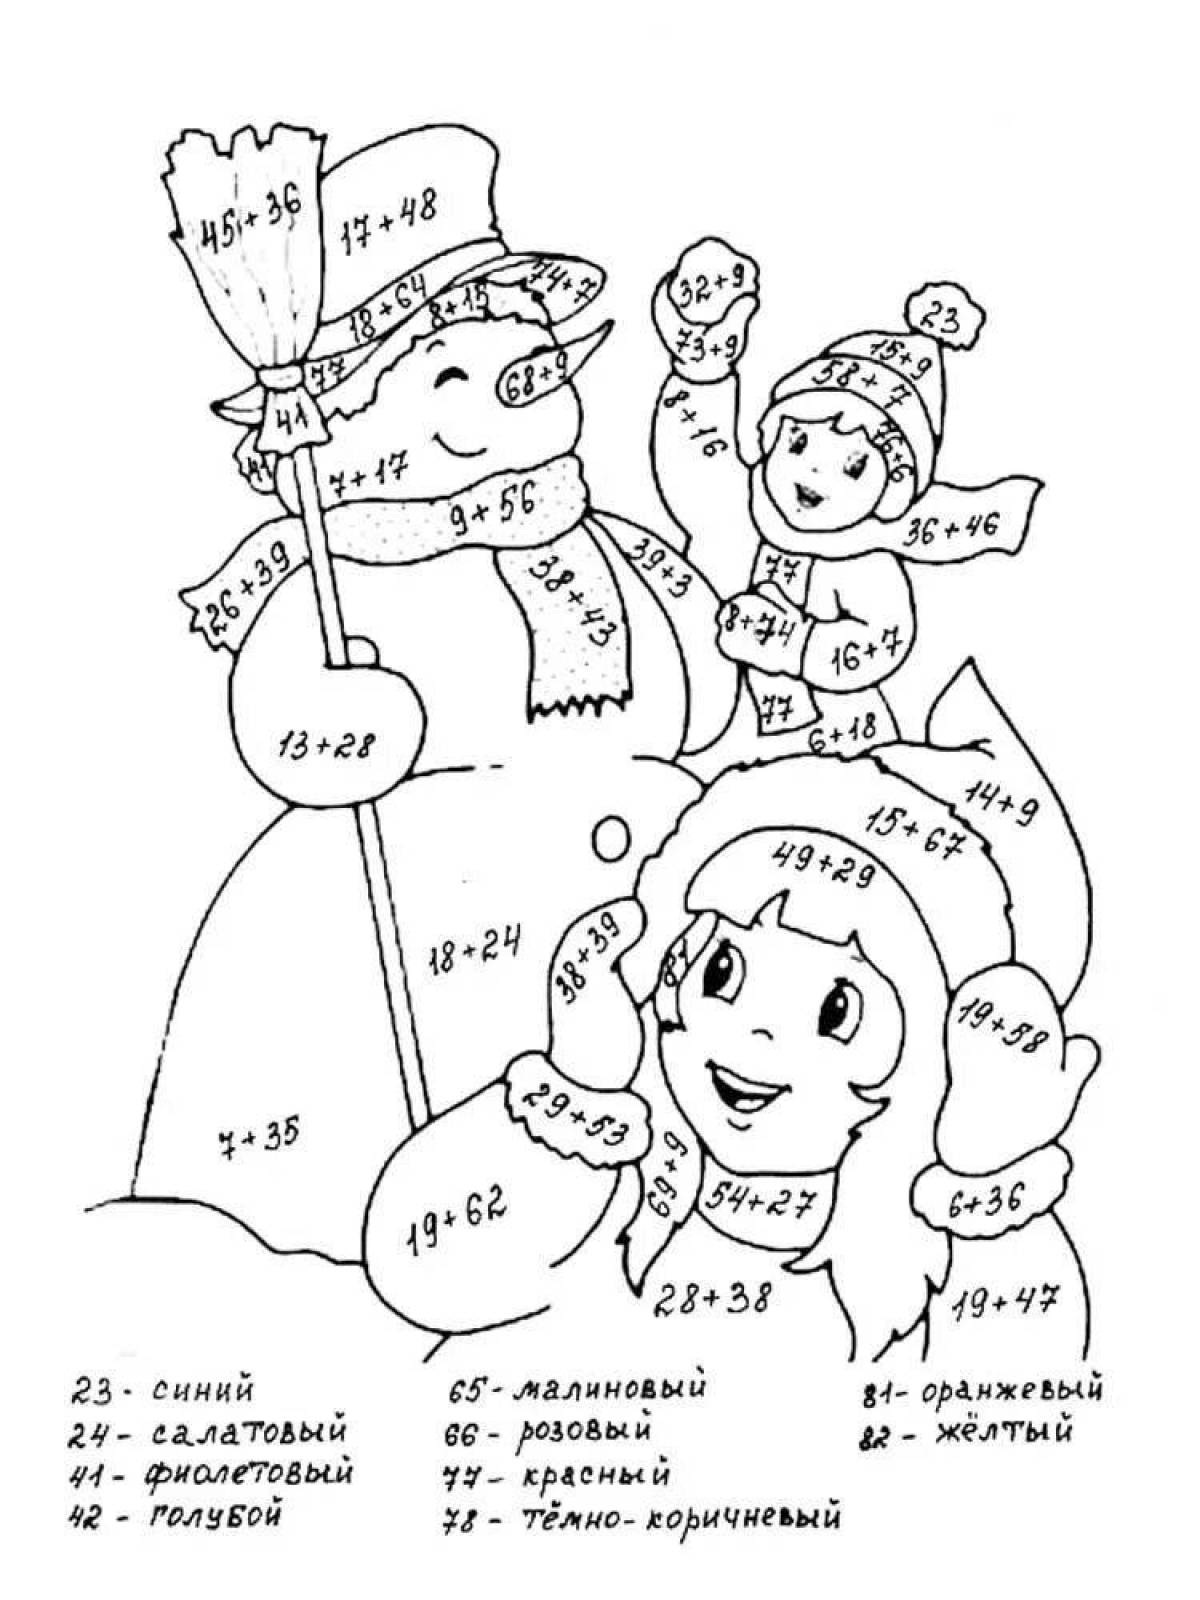 Delightful subtraction coloring book for grade 1